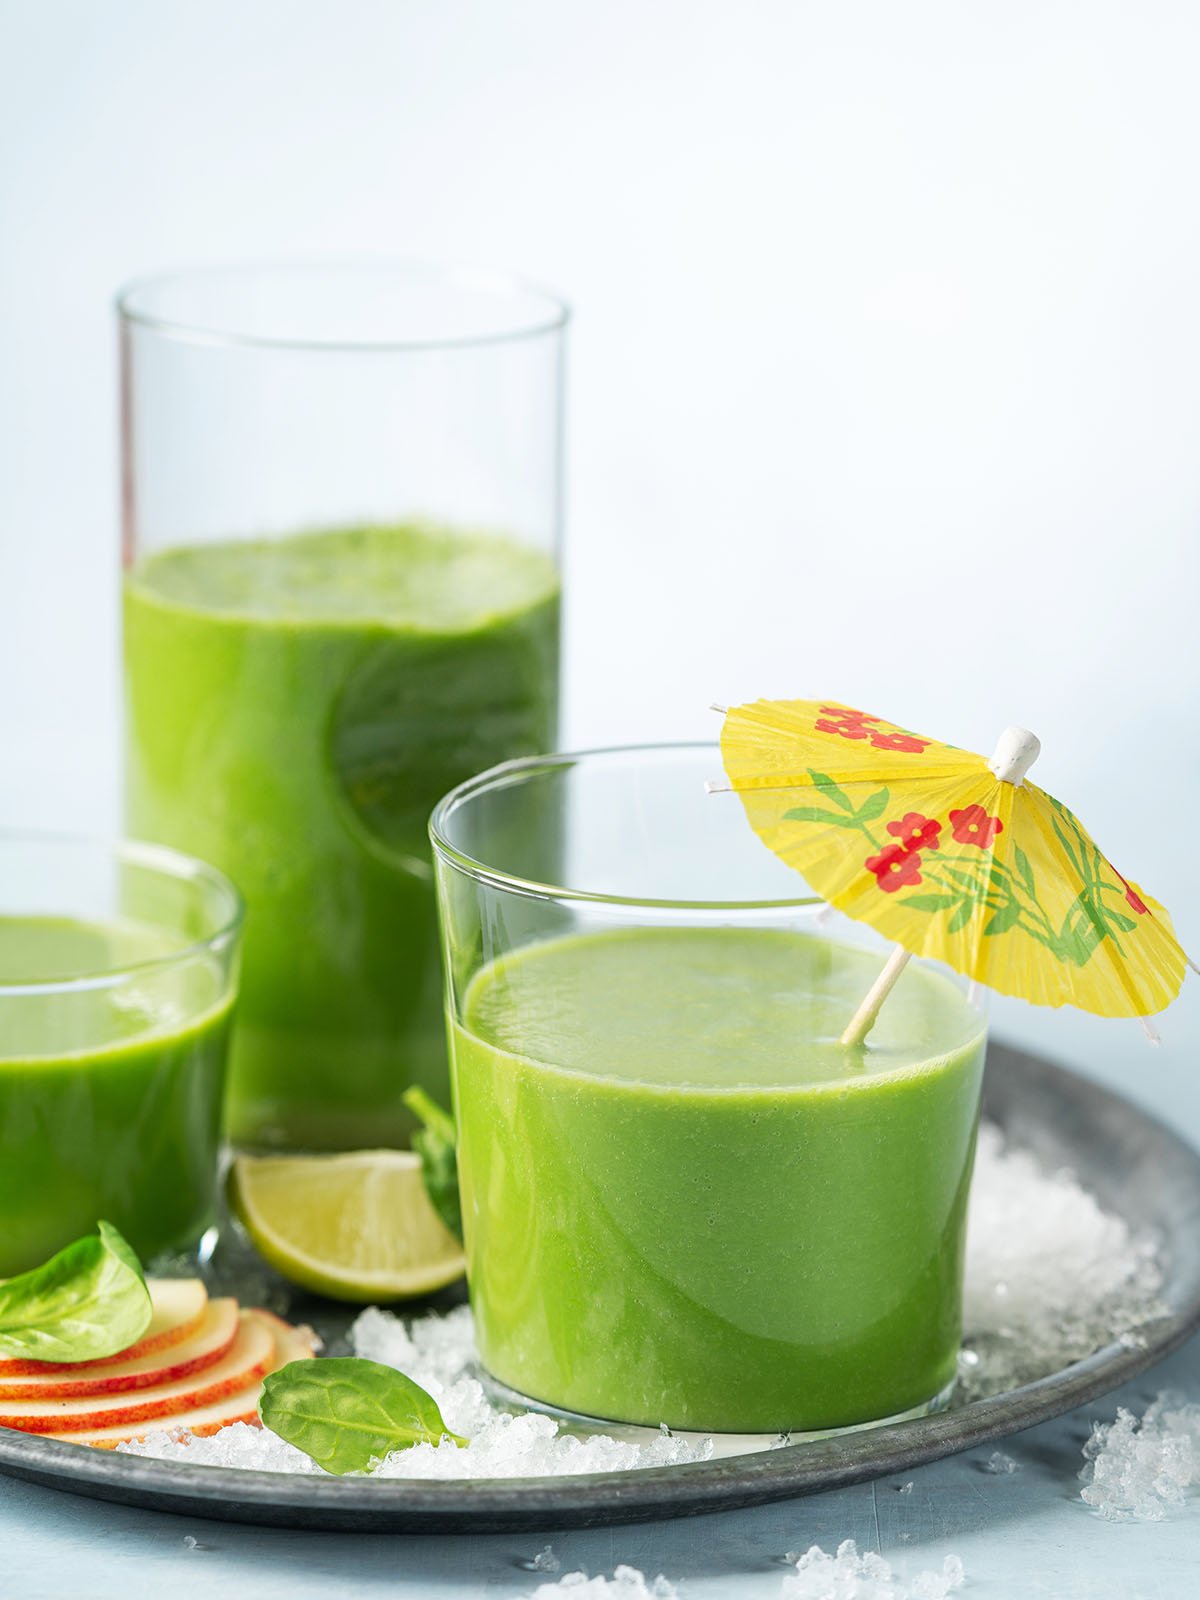 Green smoothie in glass with organic ingredients, vegetables on a light background.